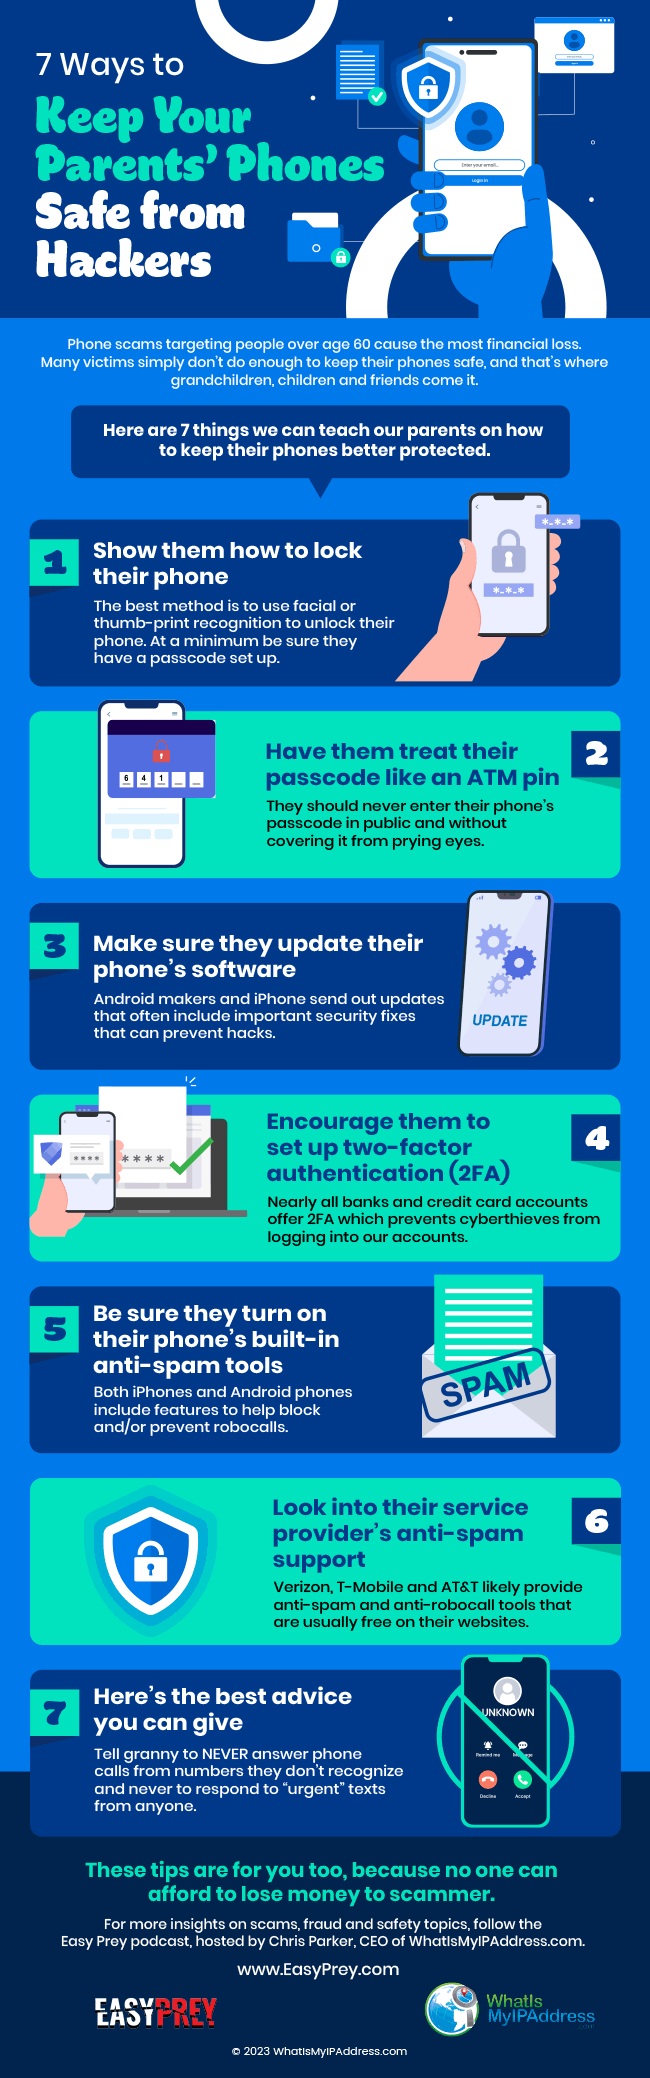 iPhone Safety Infographic - 7 ways to make phones hack-proof.